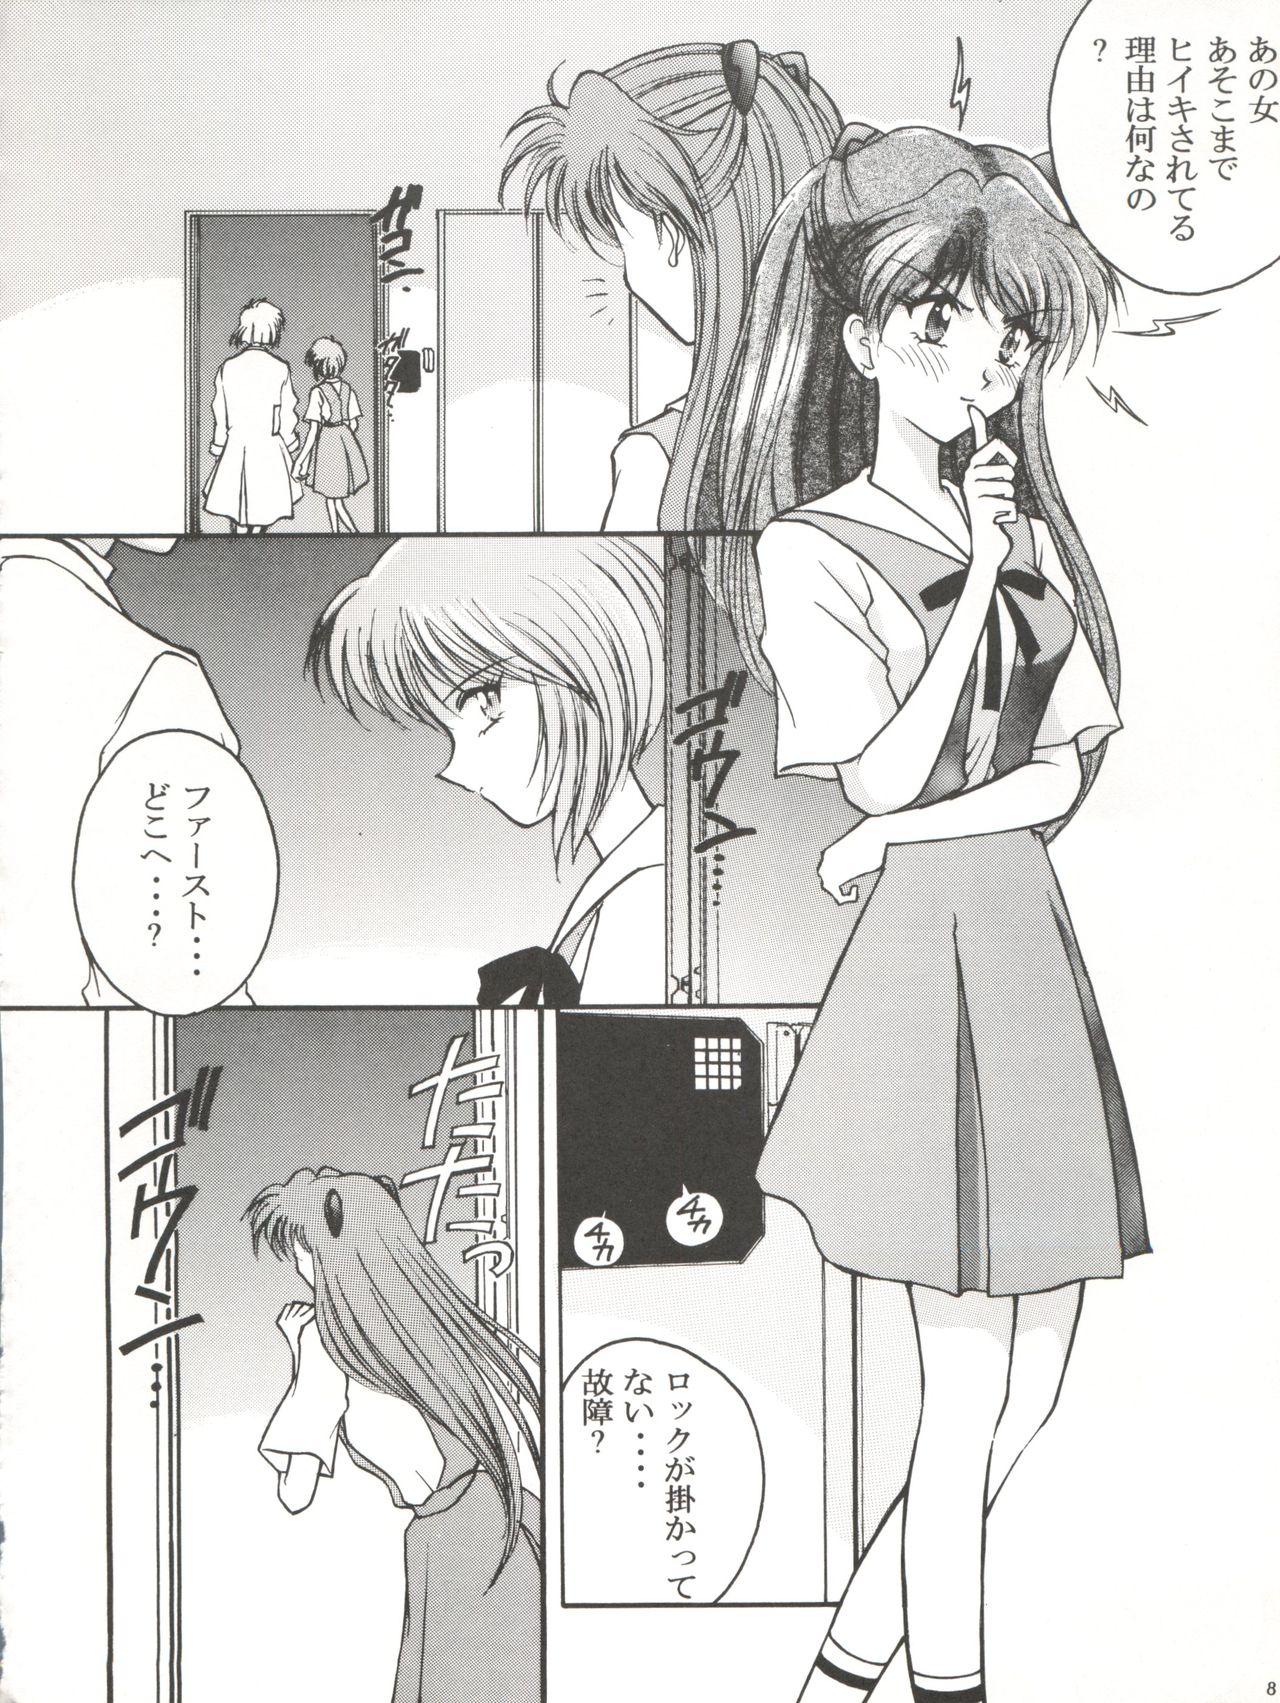 Shaved Mighty Smile - Mahou no Hohoemi - Neon genesis evangelion Babysitter - Page 9